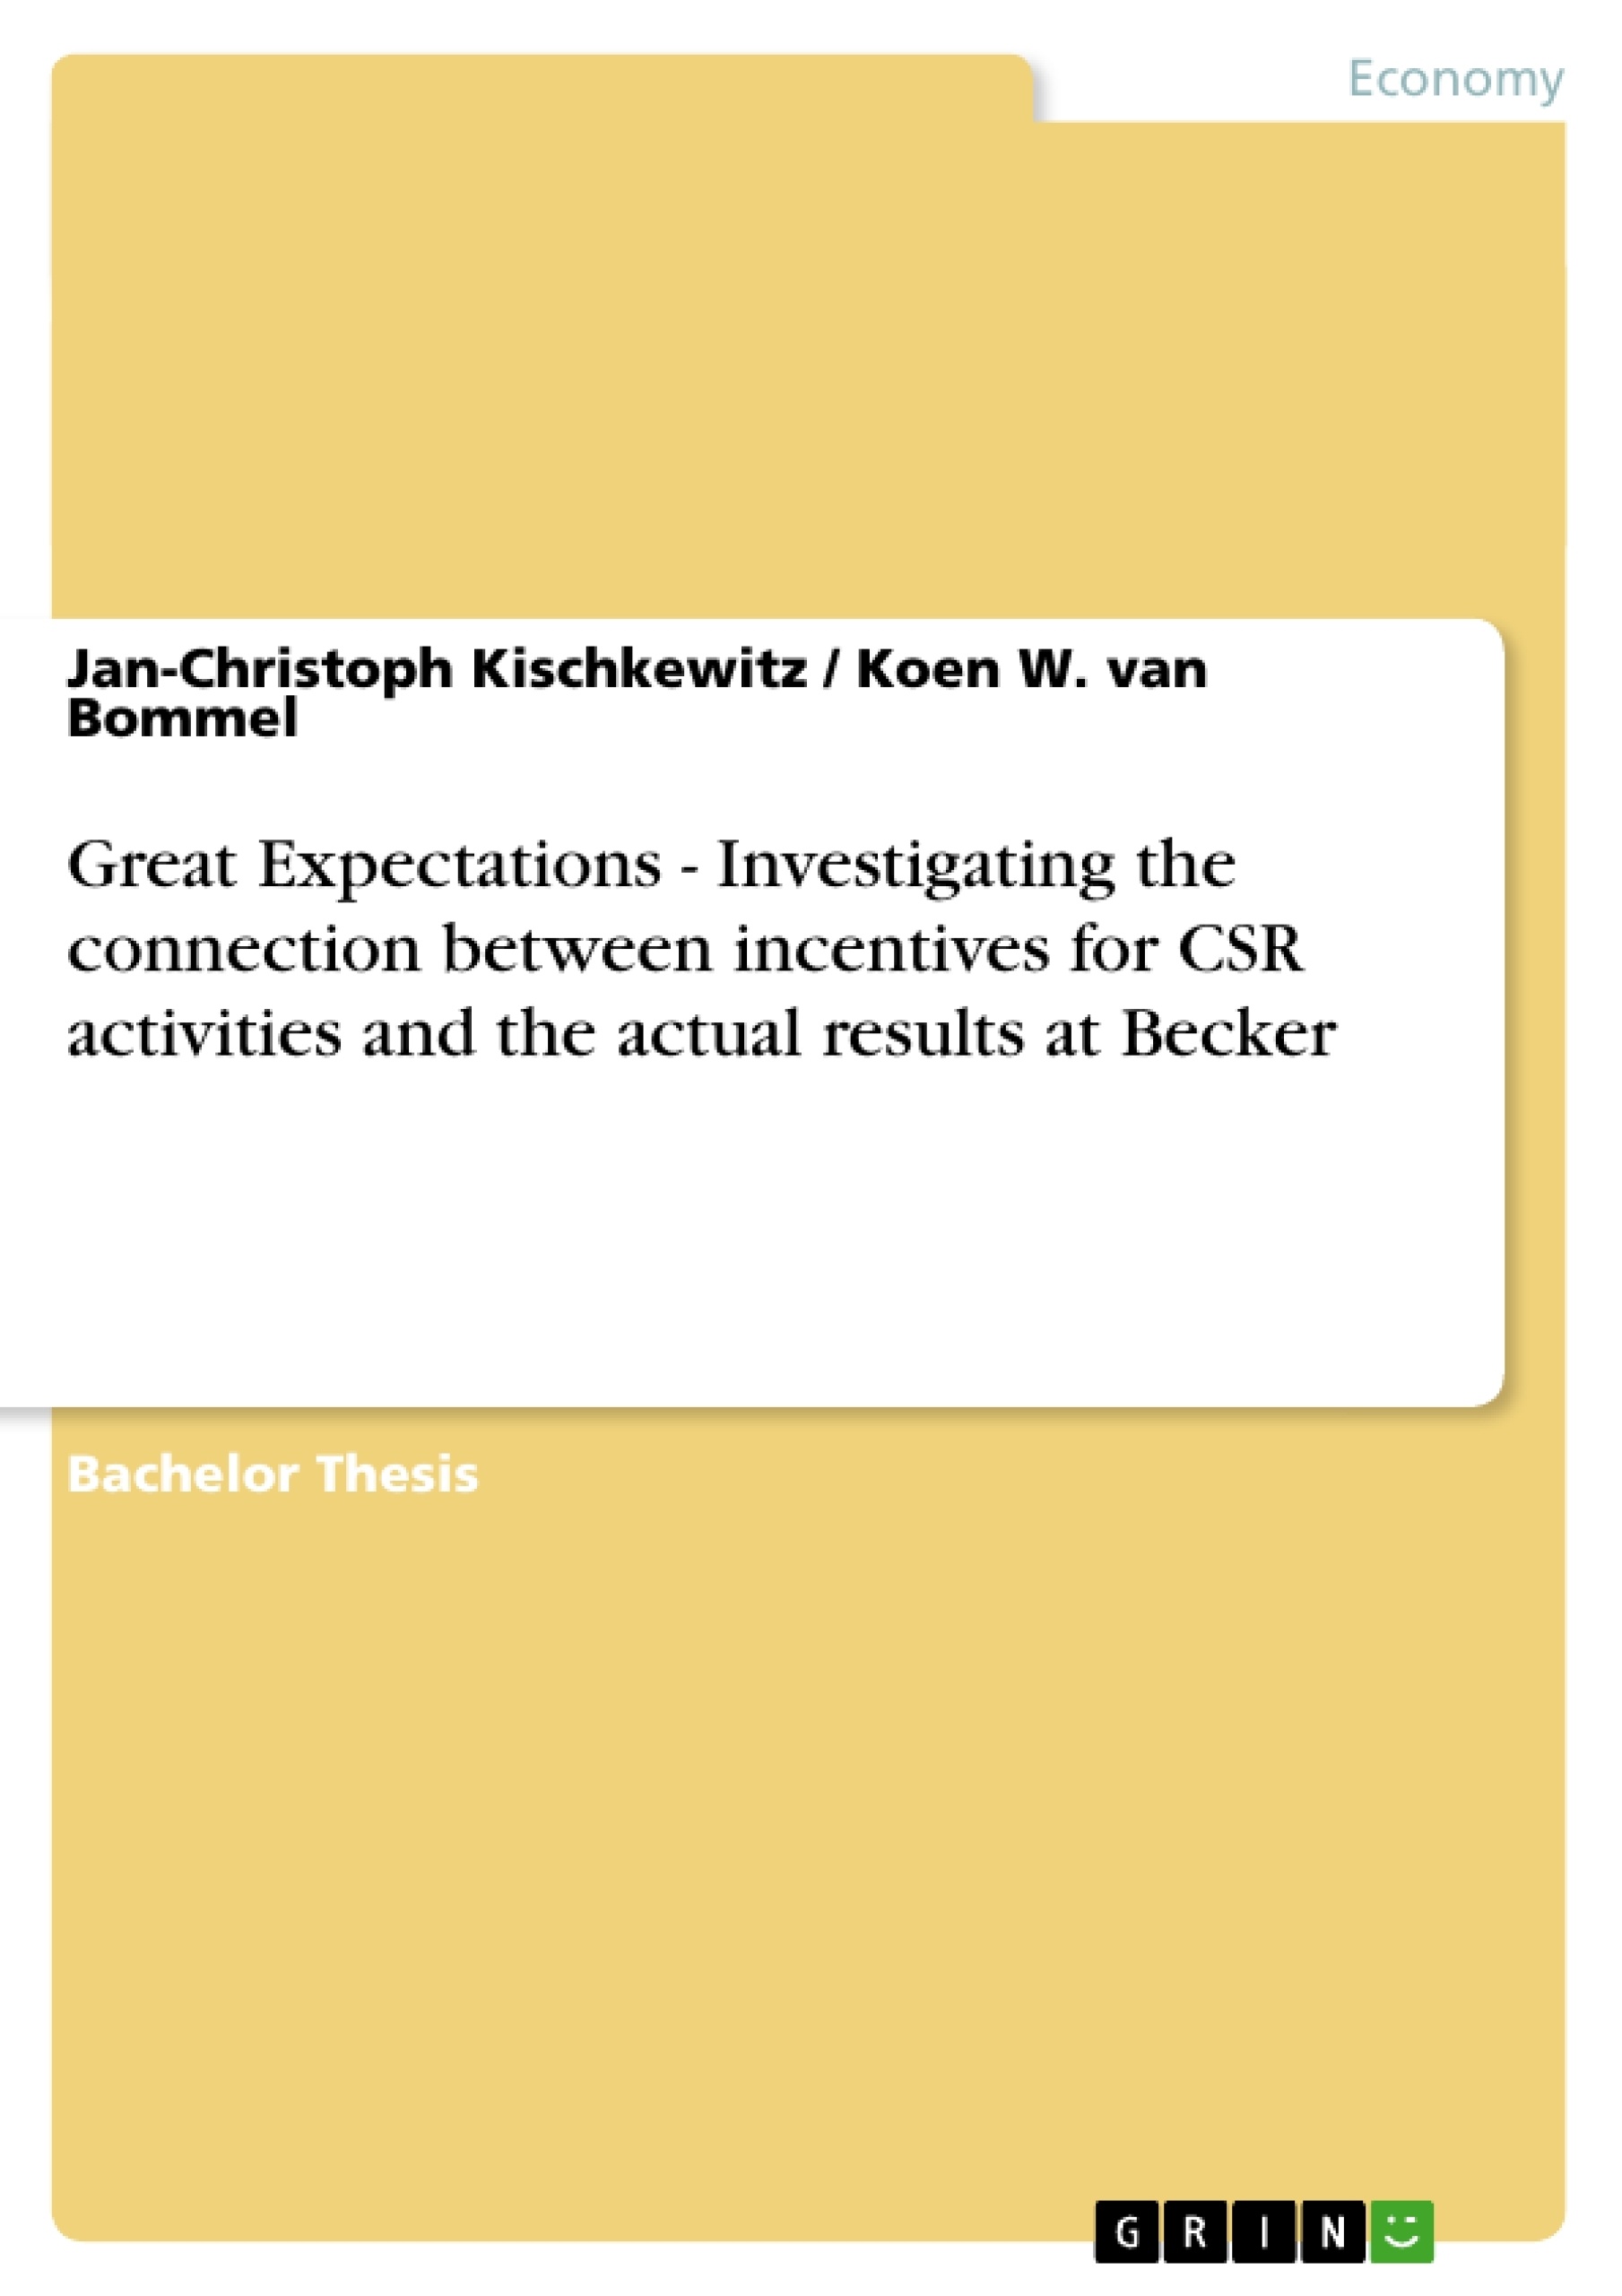 Titel: Great Expectations - Investigating the connection between incentives for CSR activities and the actual results at Becker